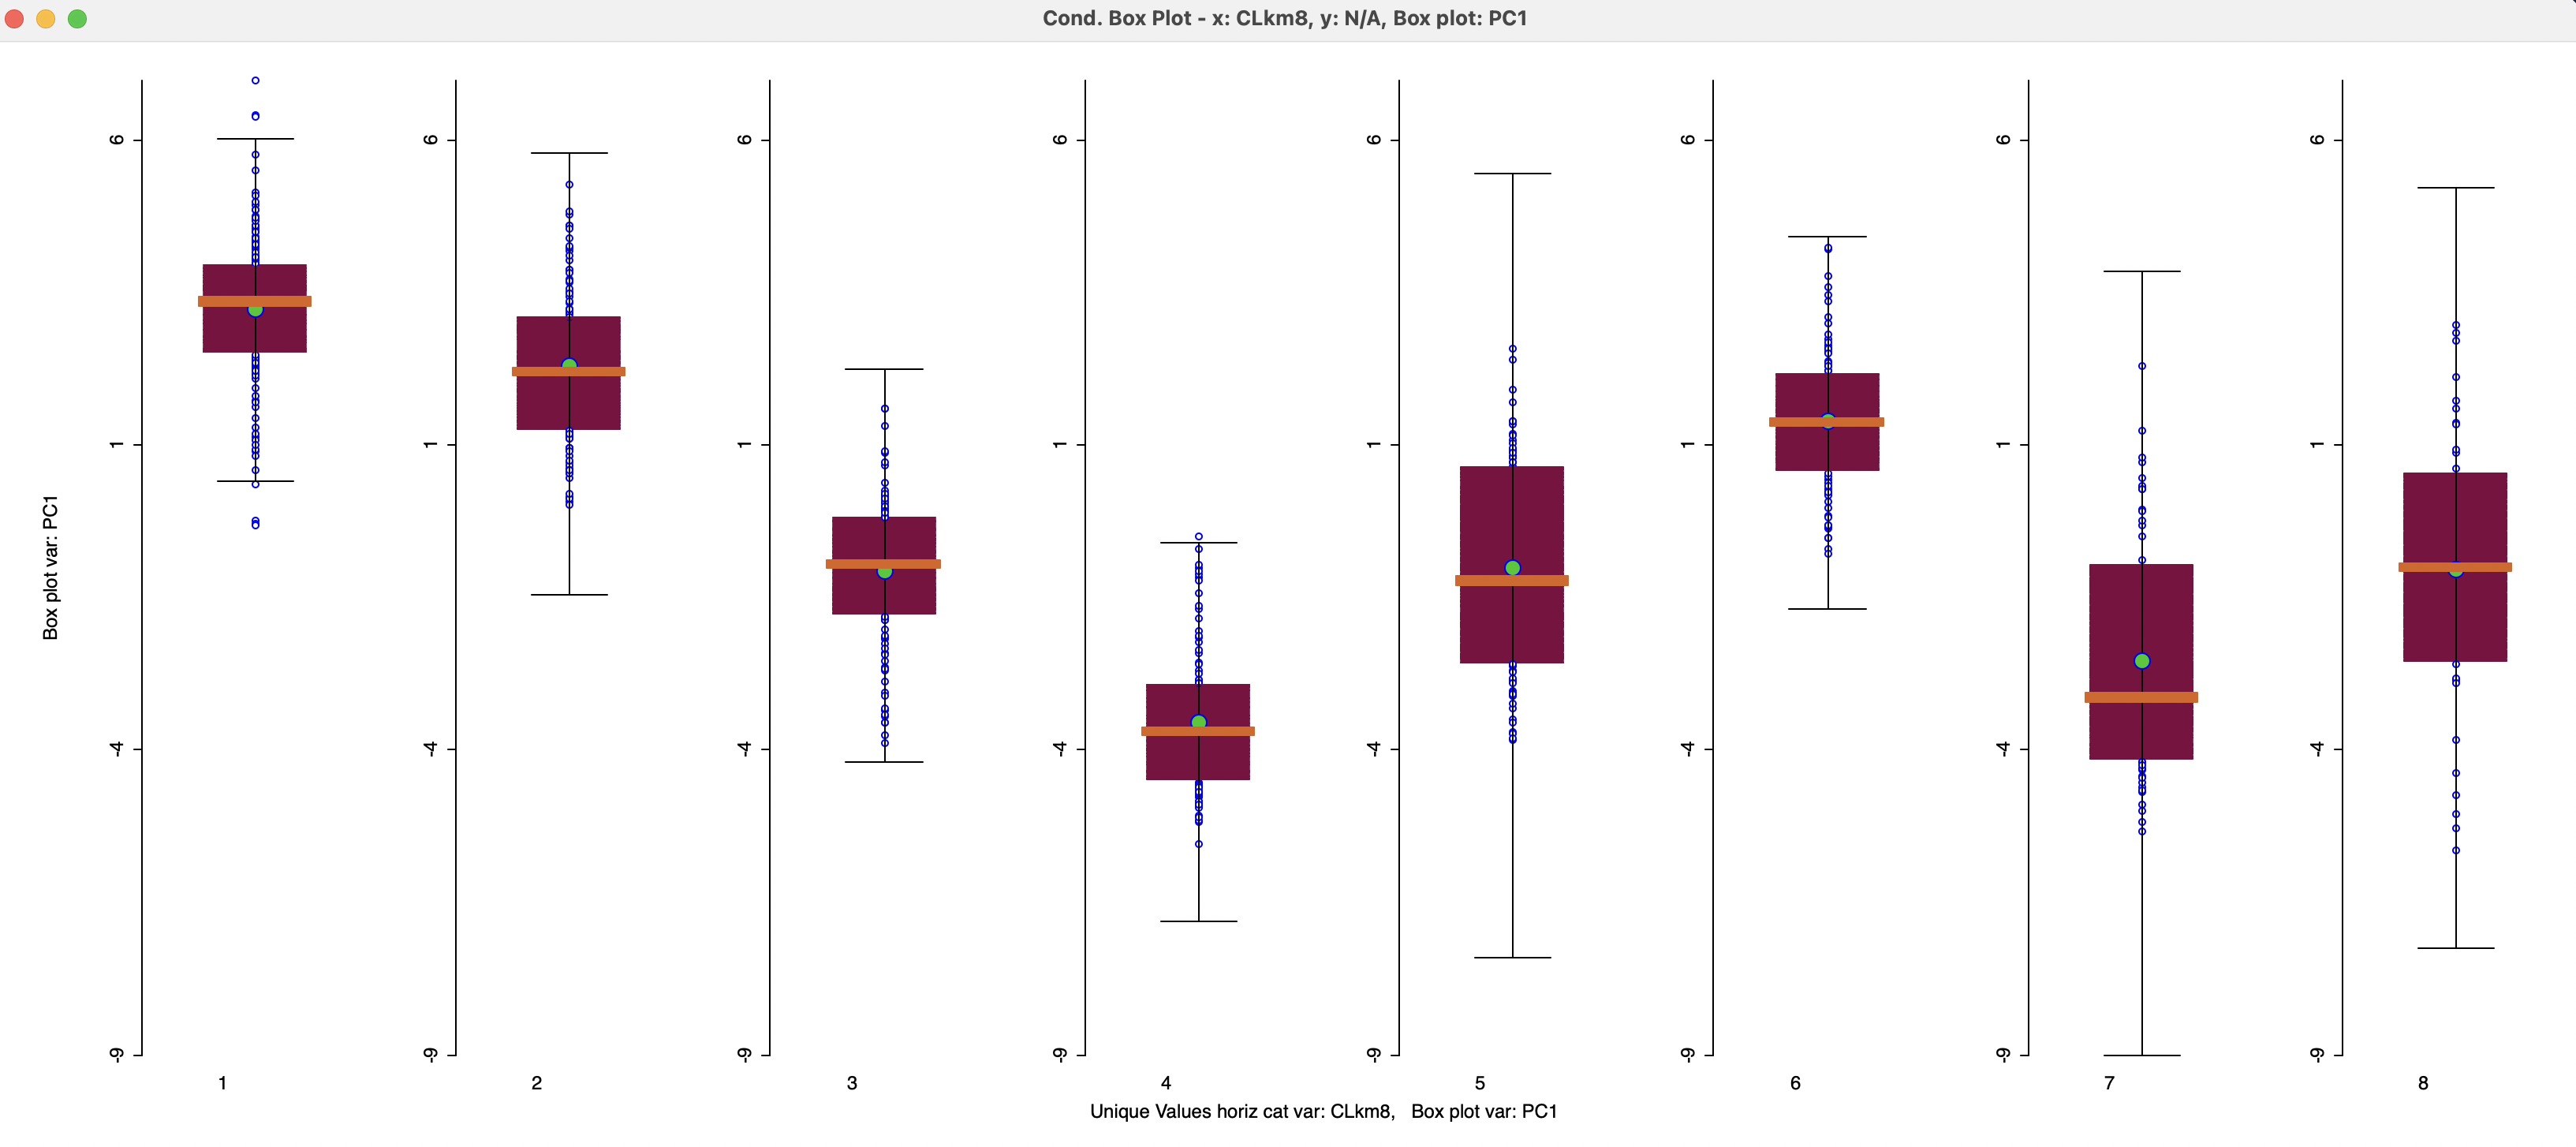 Conditional Box Plot by Cluster Category